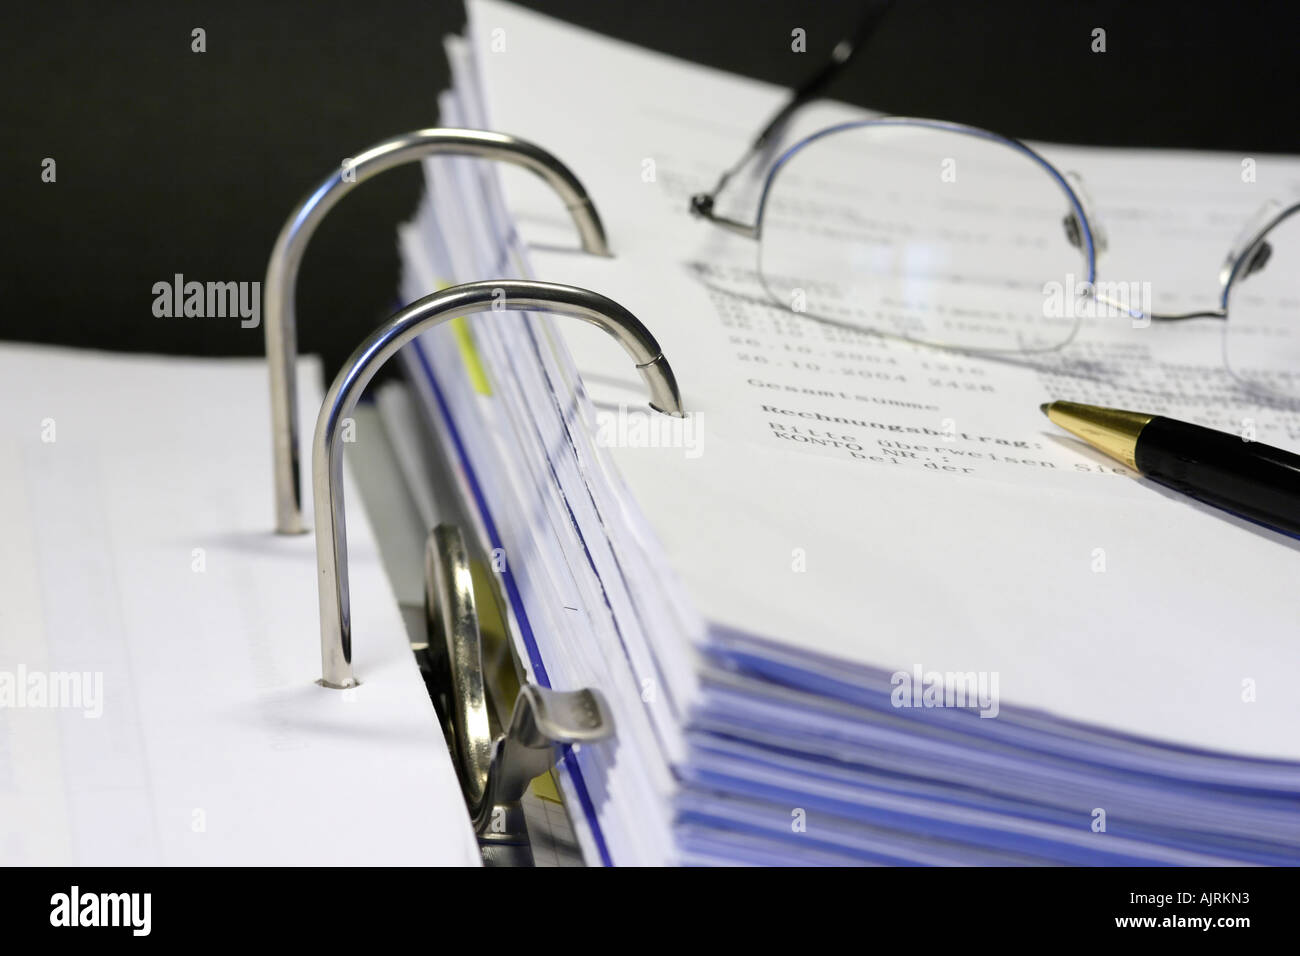 Open binder with different documents on black background Stock Photo